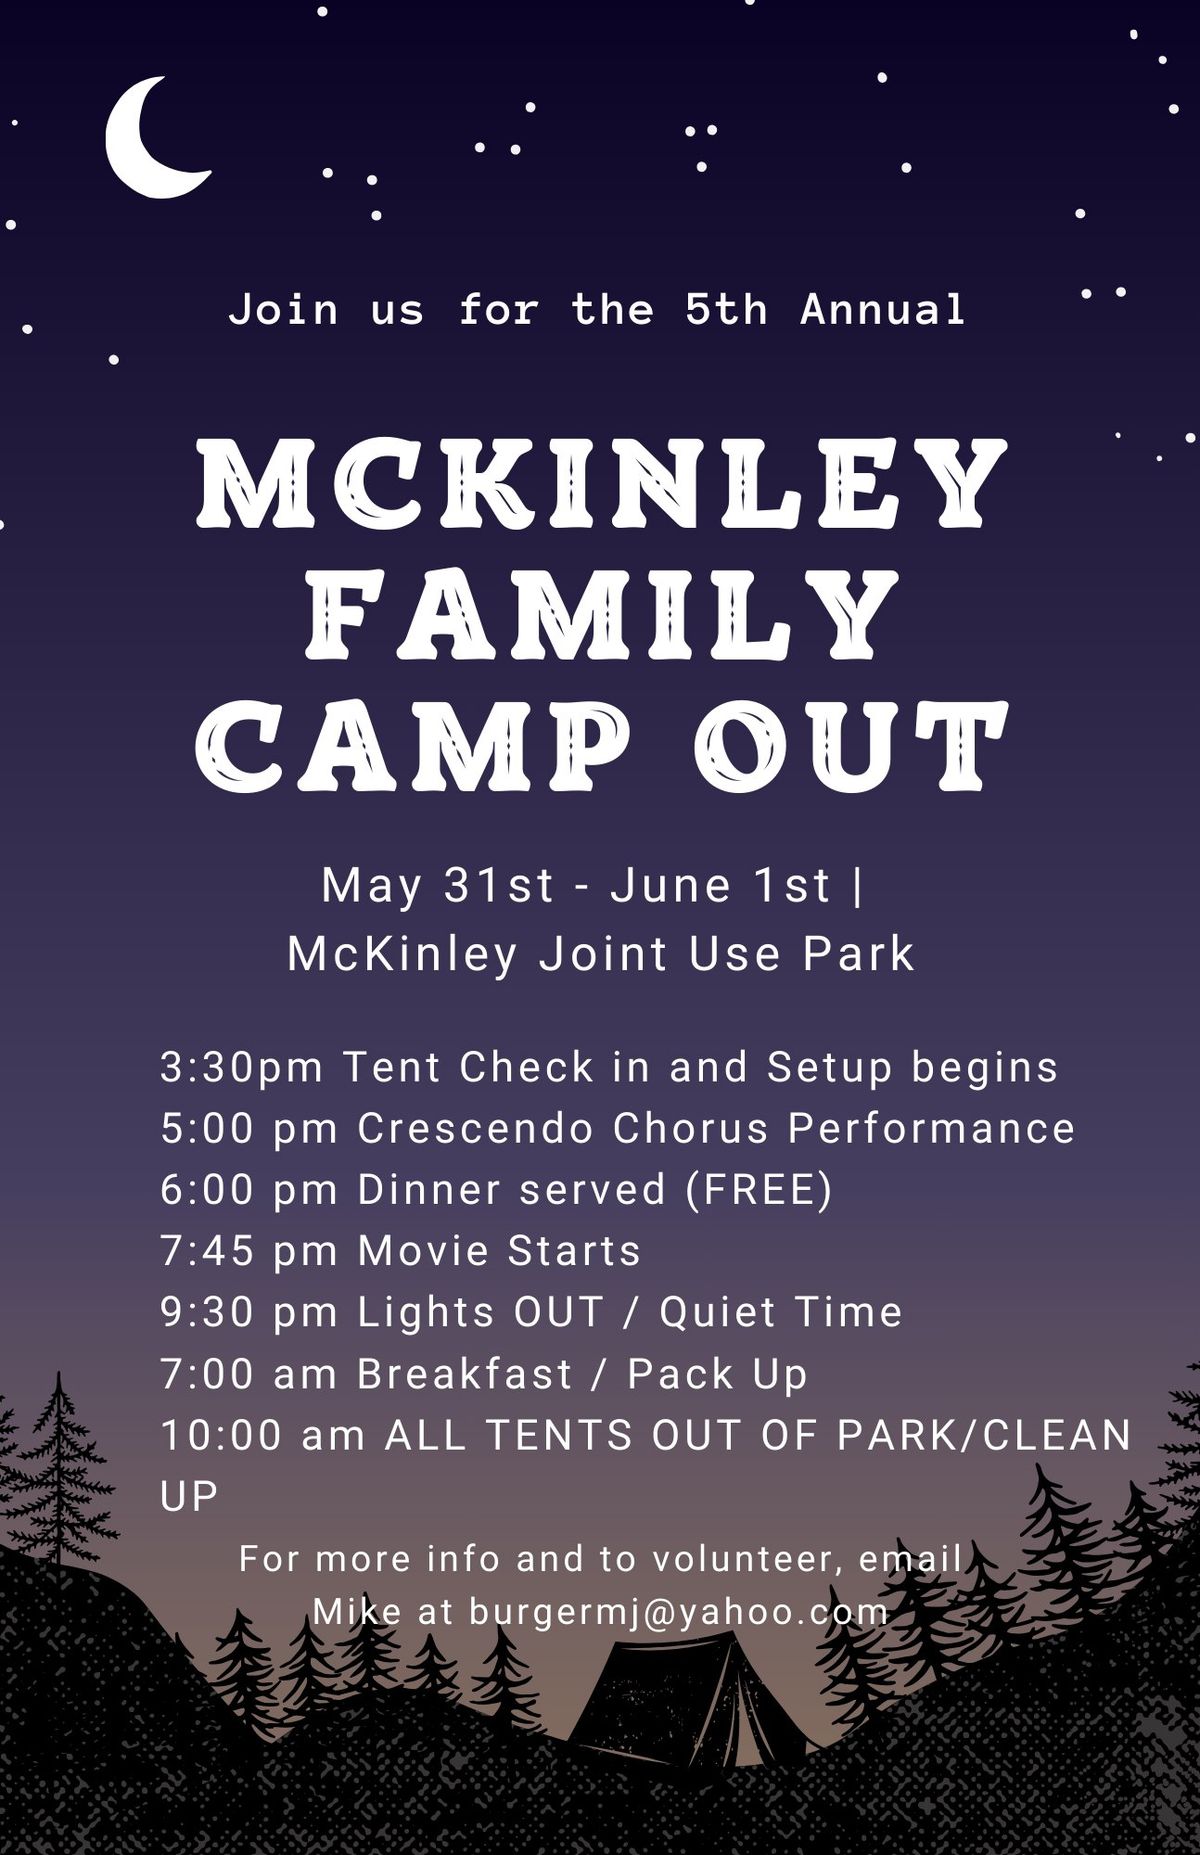 5th Annual McKinley Family Campout